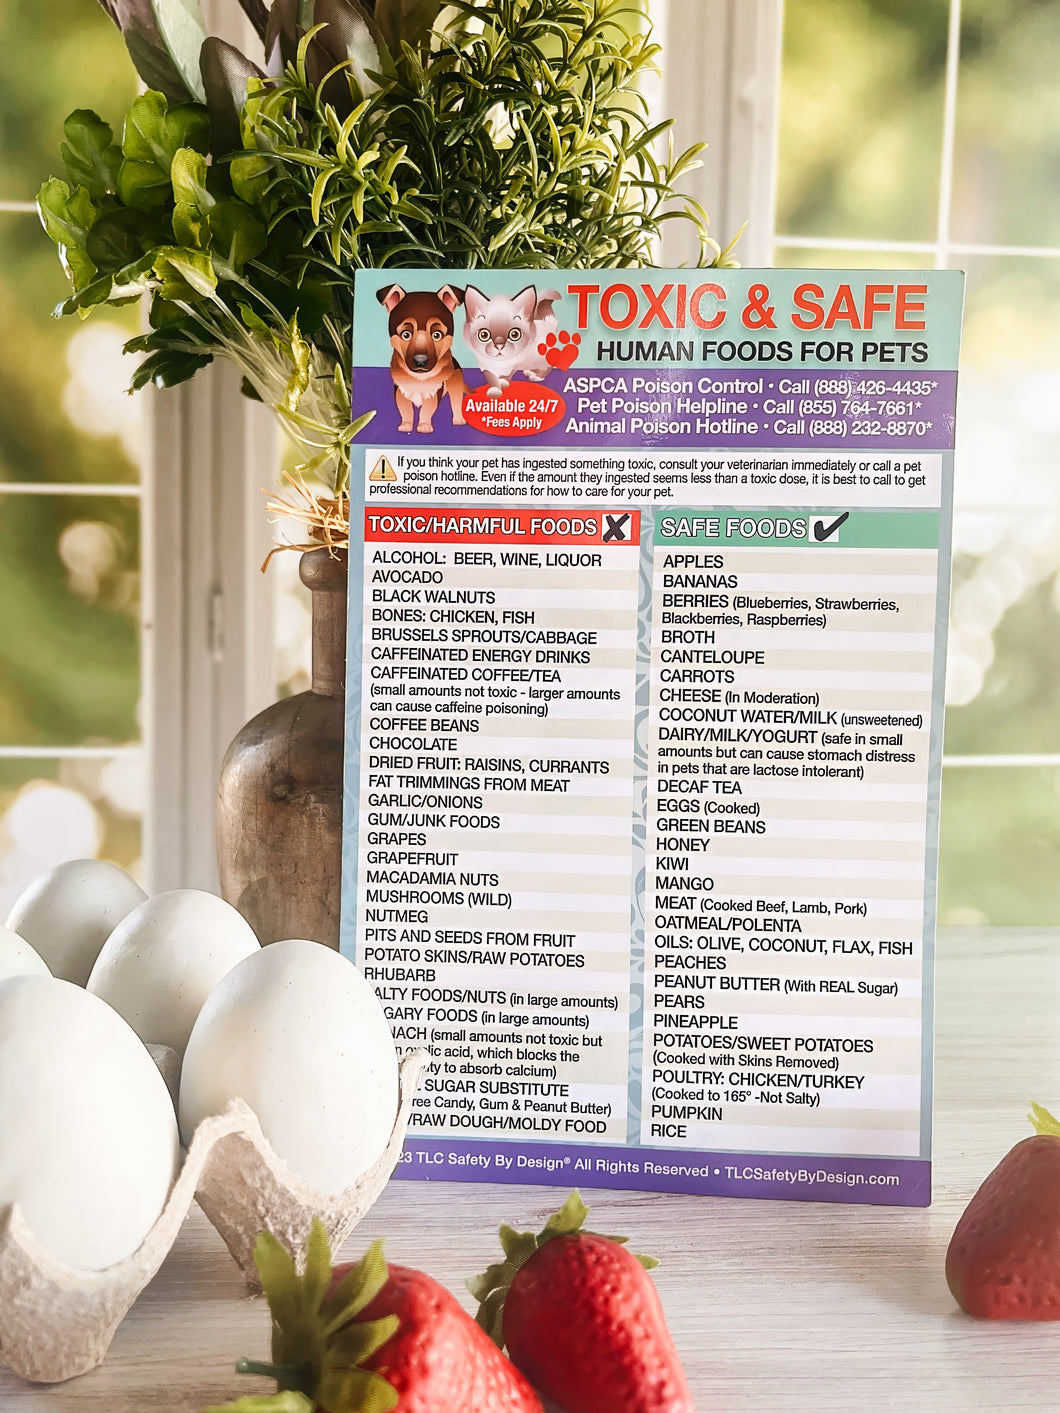 Toxic Harmful and Safe Foods for Pets Fridge Safety Magnet 5.5” x 8.5”  Dogs Cats Poison Emergency Veterinarian Approved